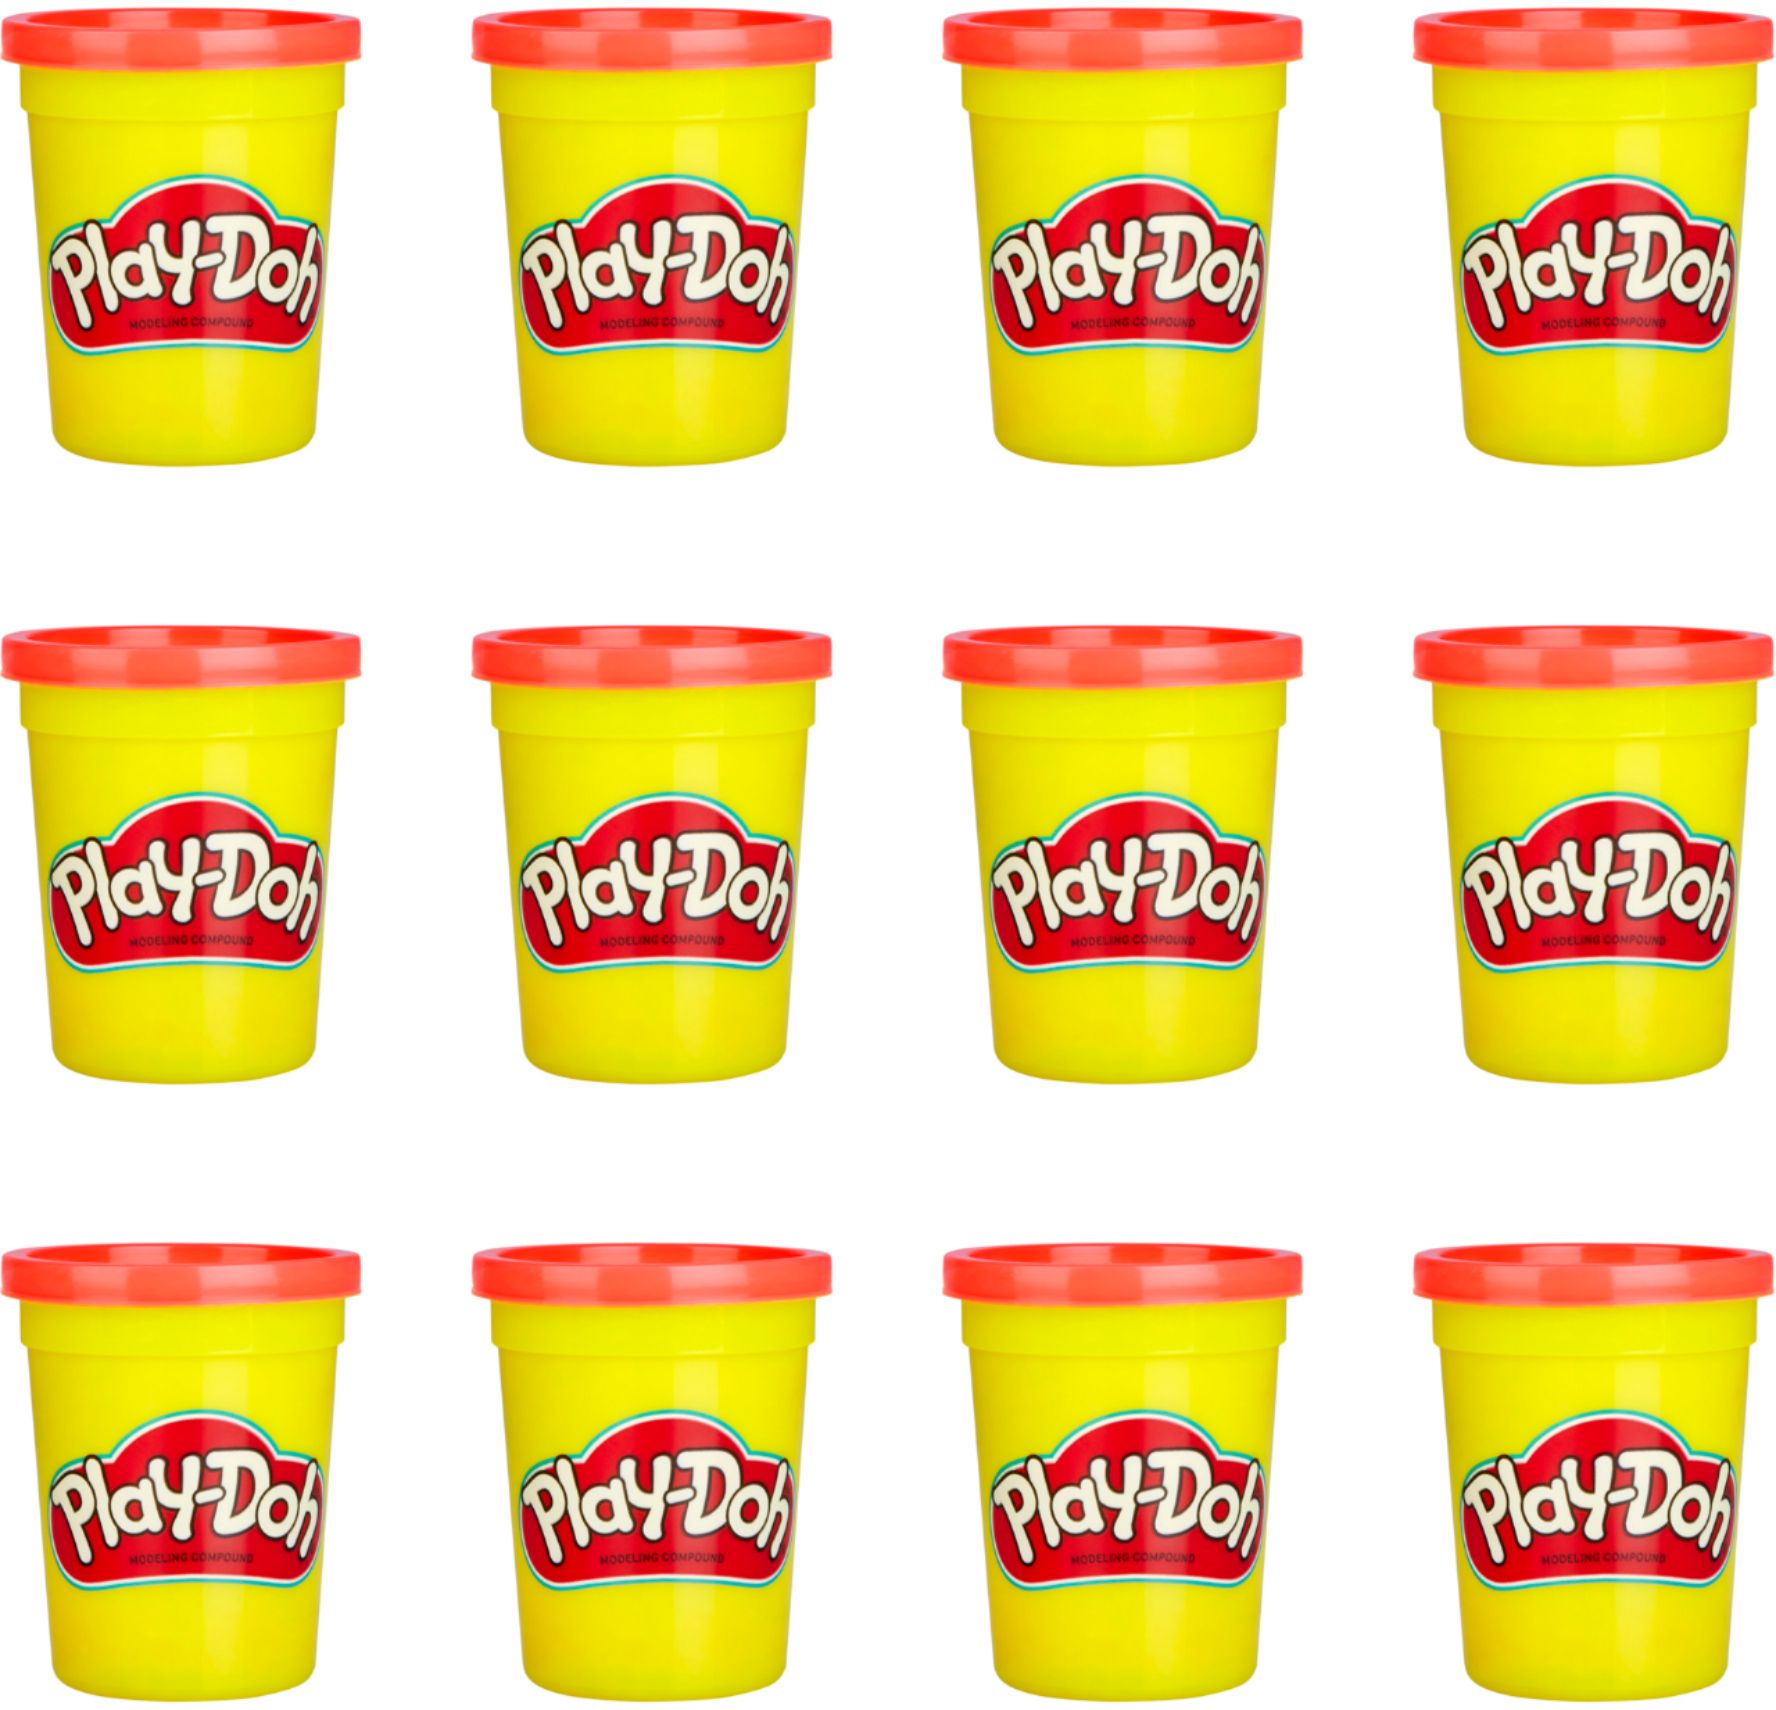 Play-Doh Bulk 12-Pack of Red Non-Toxic Modeling Compound, 4-Ounce